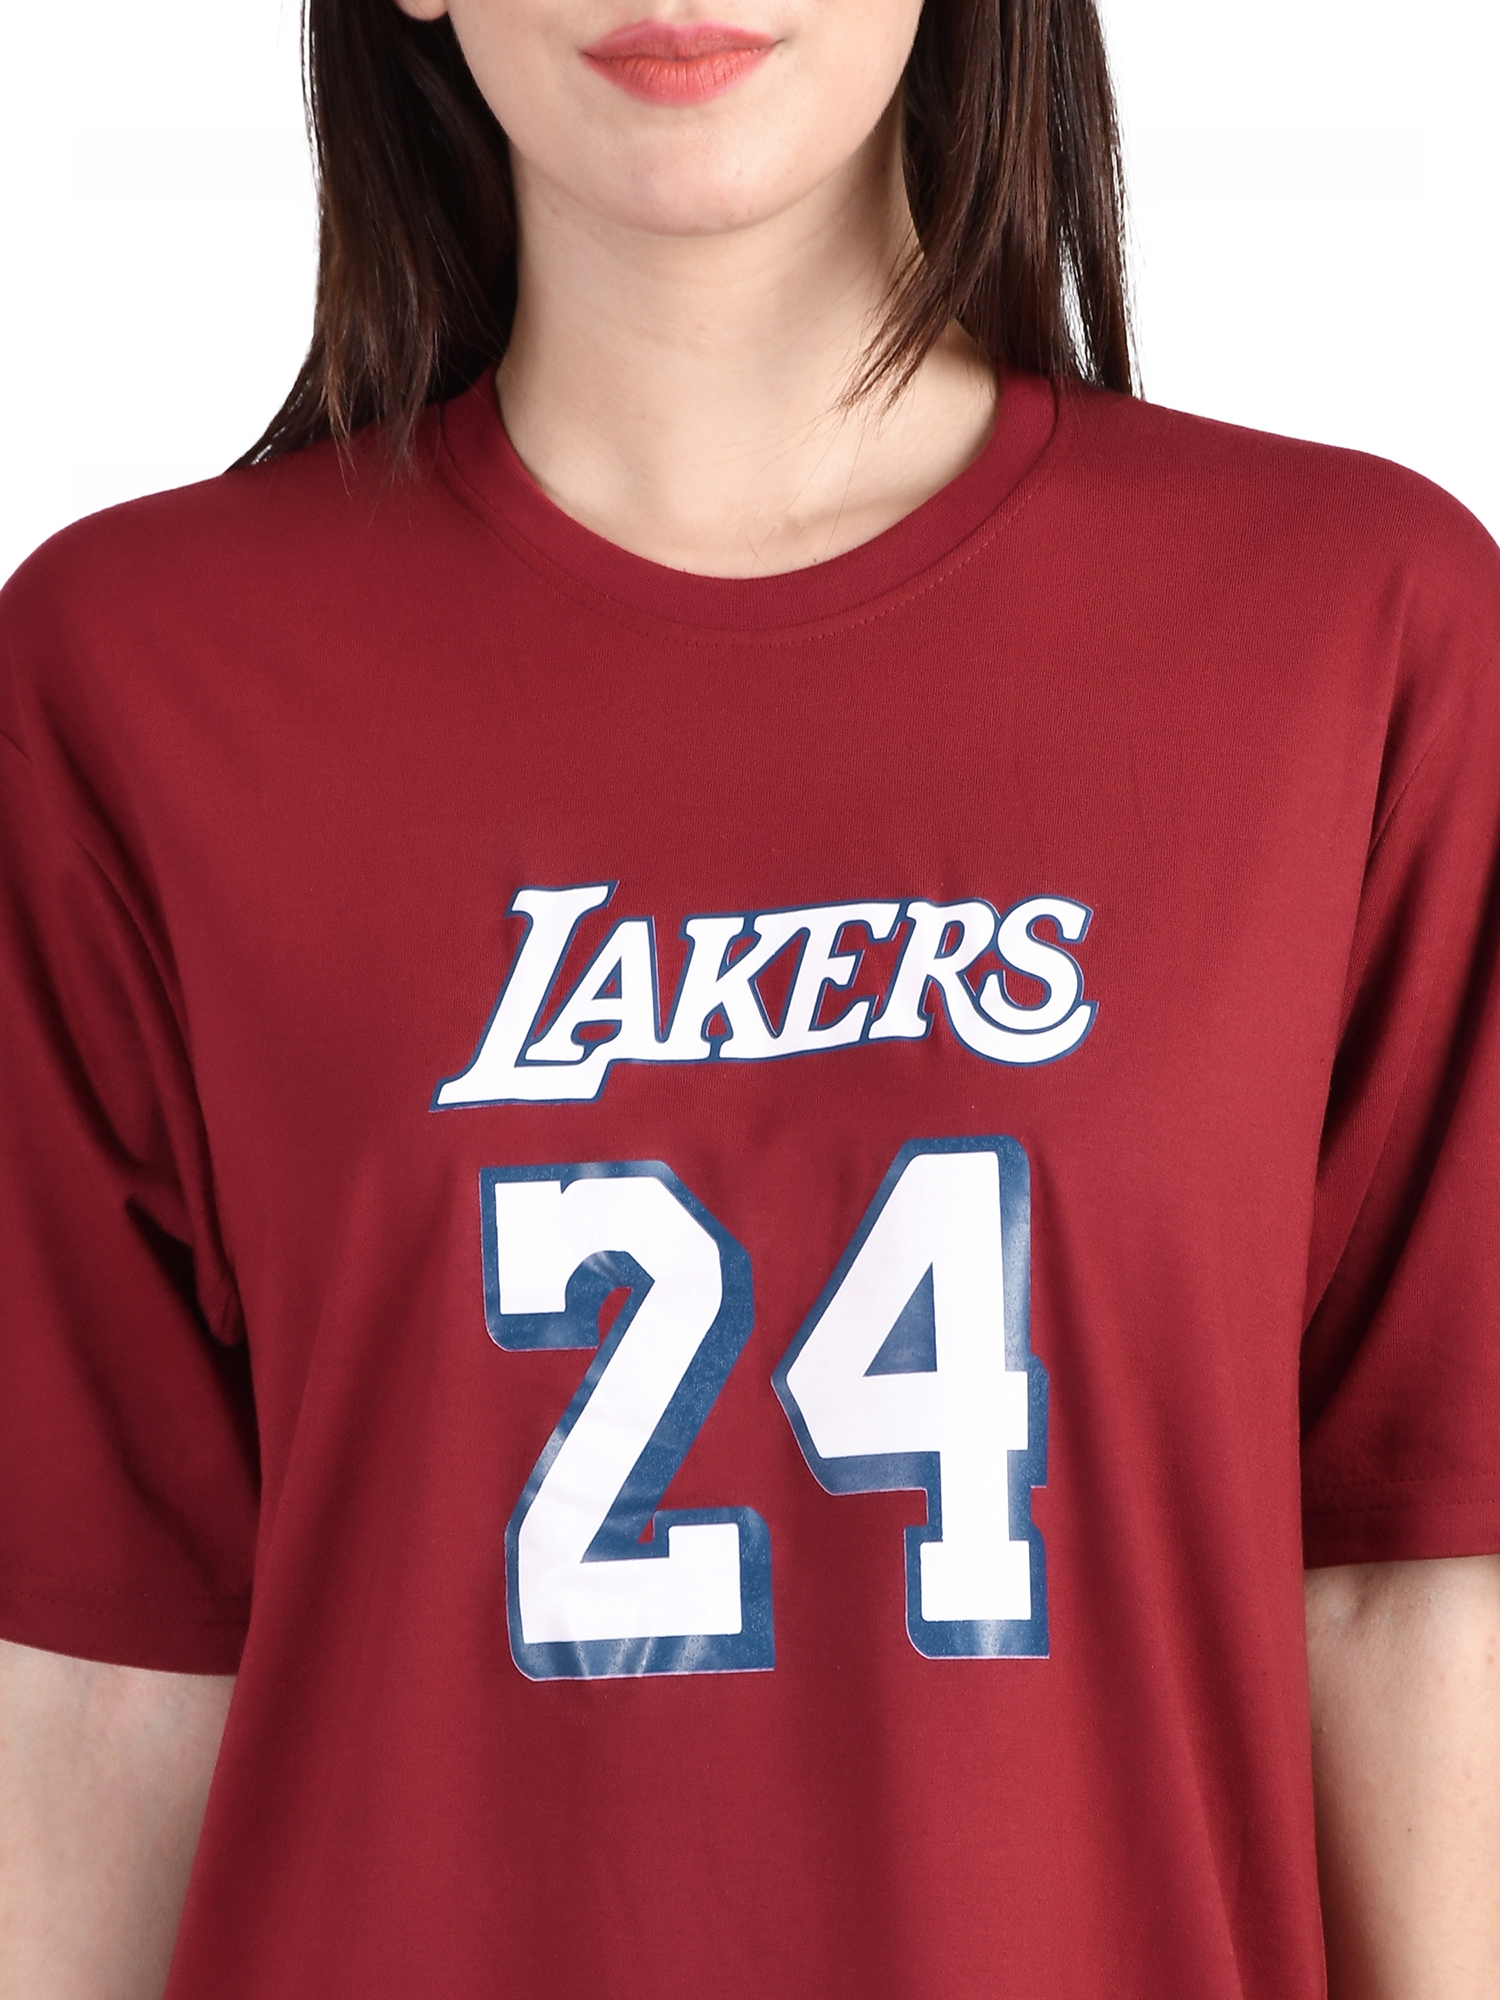 Lakers : Quirky Printed Oversized Women's Tees In Maroon Color